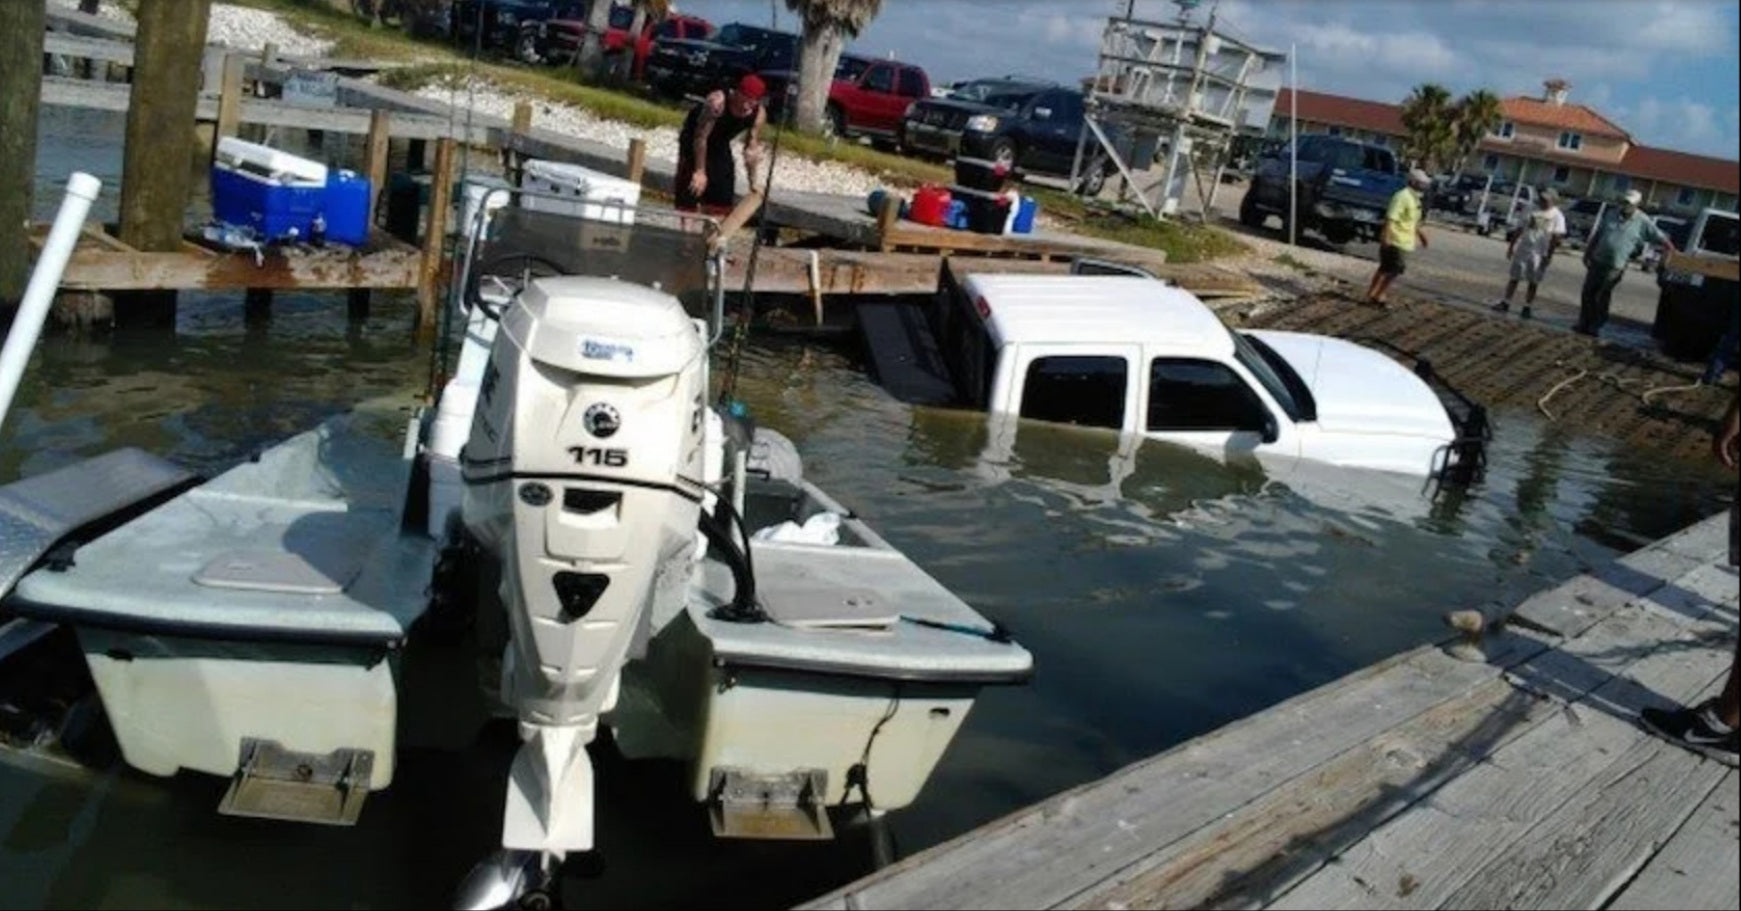 Boat Ramp Mistakes: What NOT To Do At Public Boat Ramps